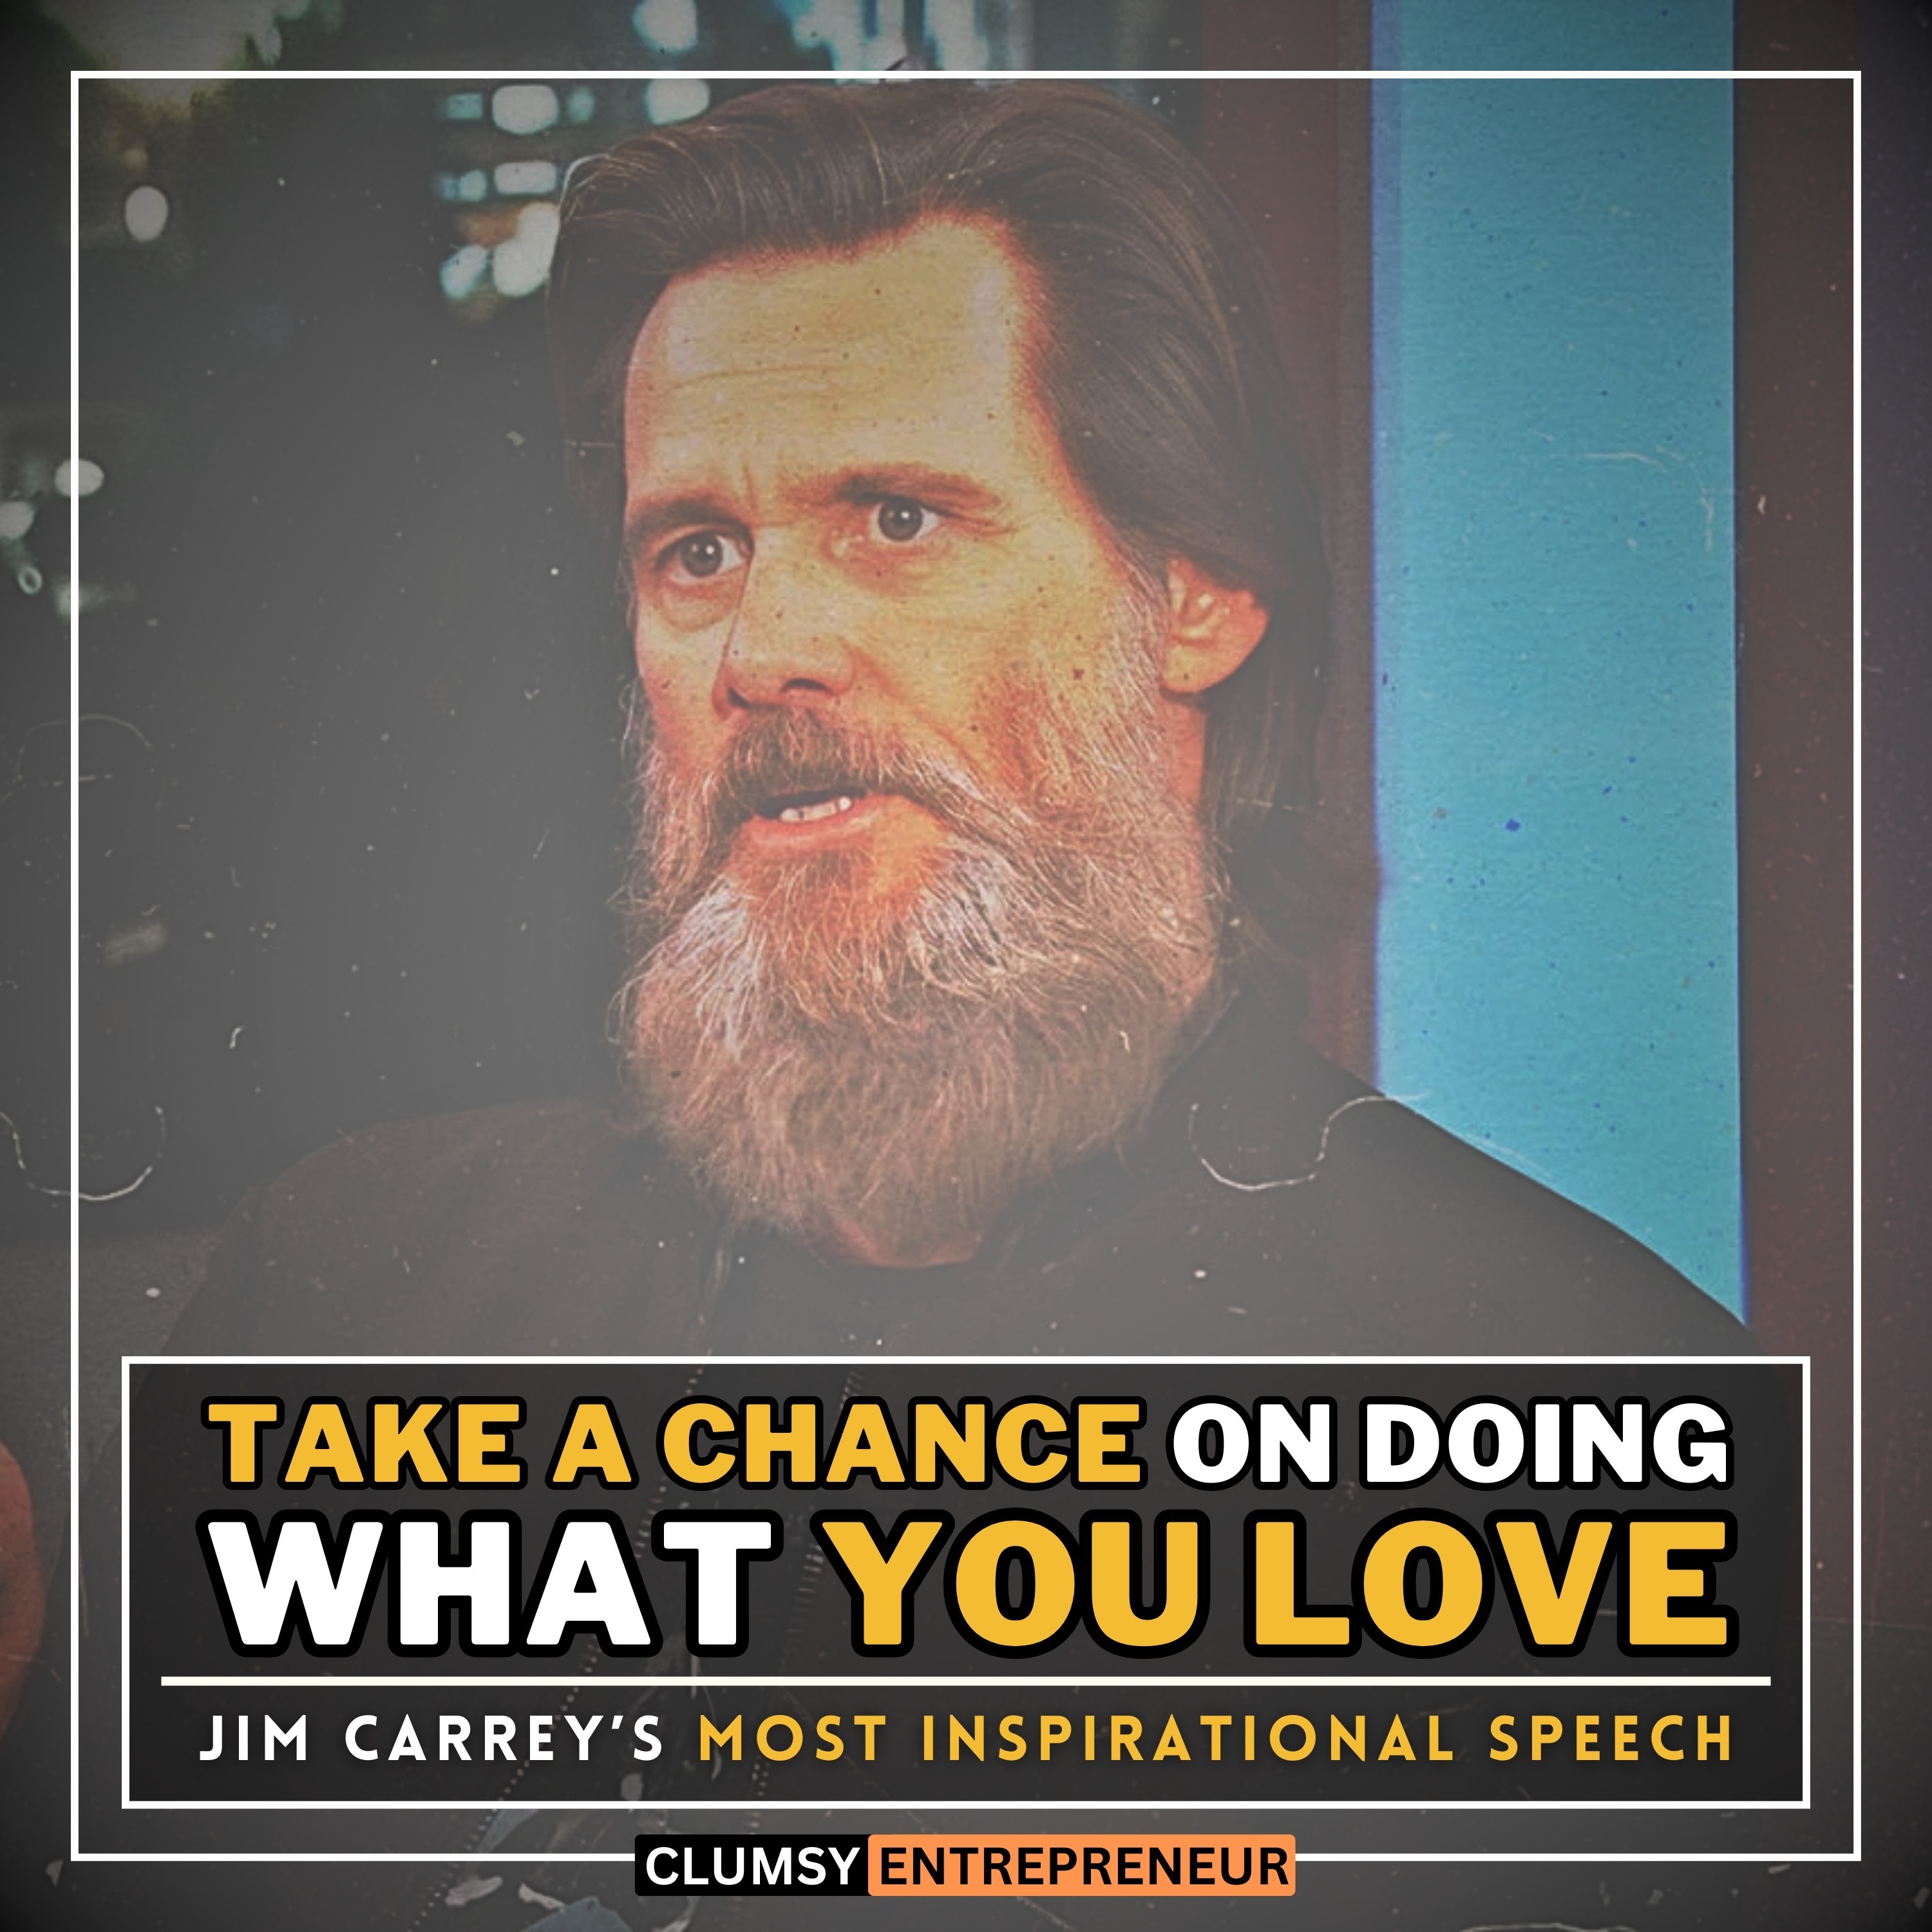 Take A Chance on Doing What You Love - Jim Carrey | World's Most Inspirational Speech Will Change Your Life